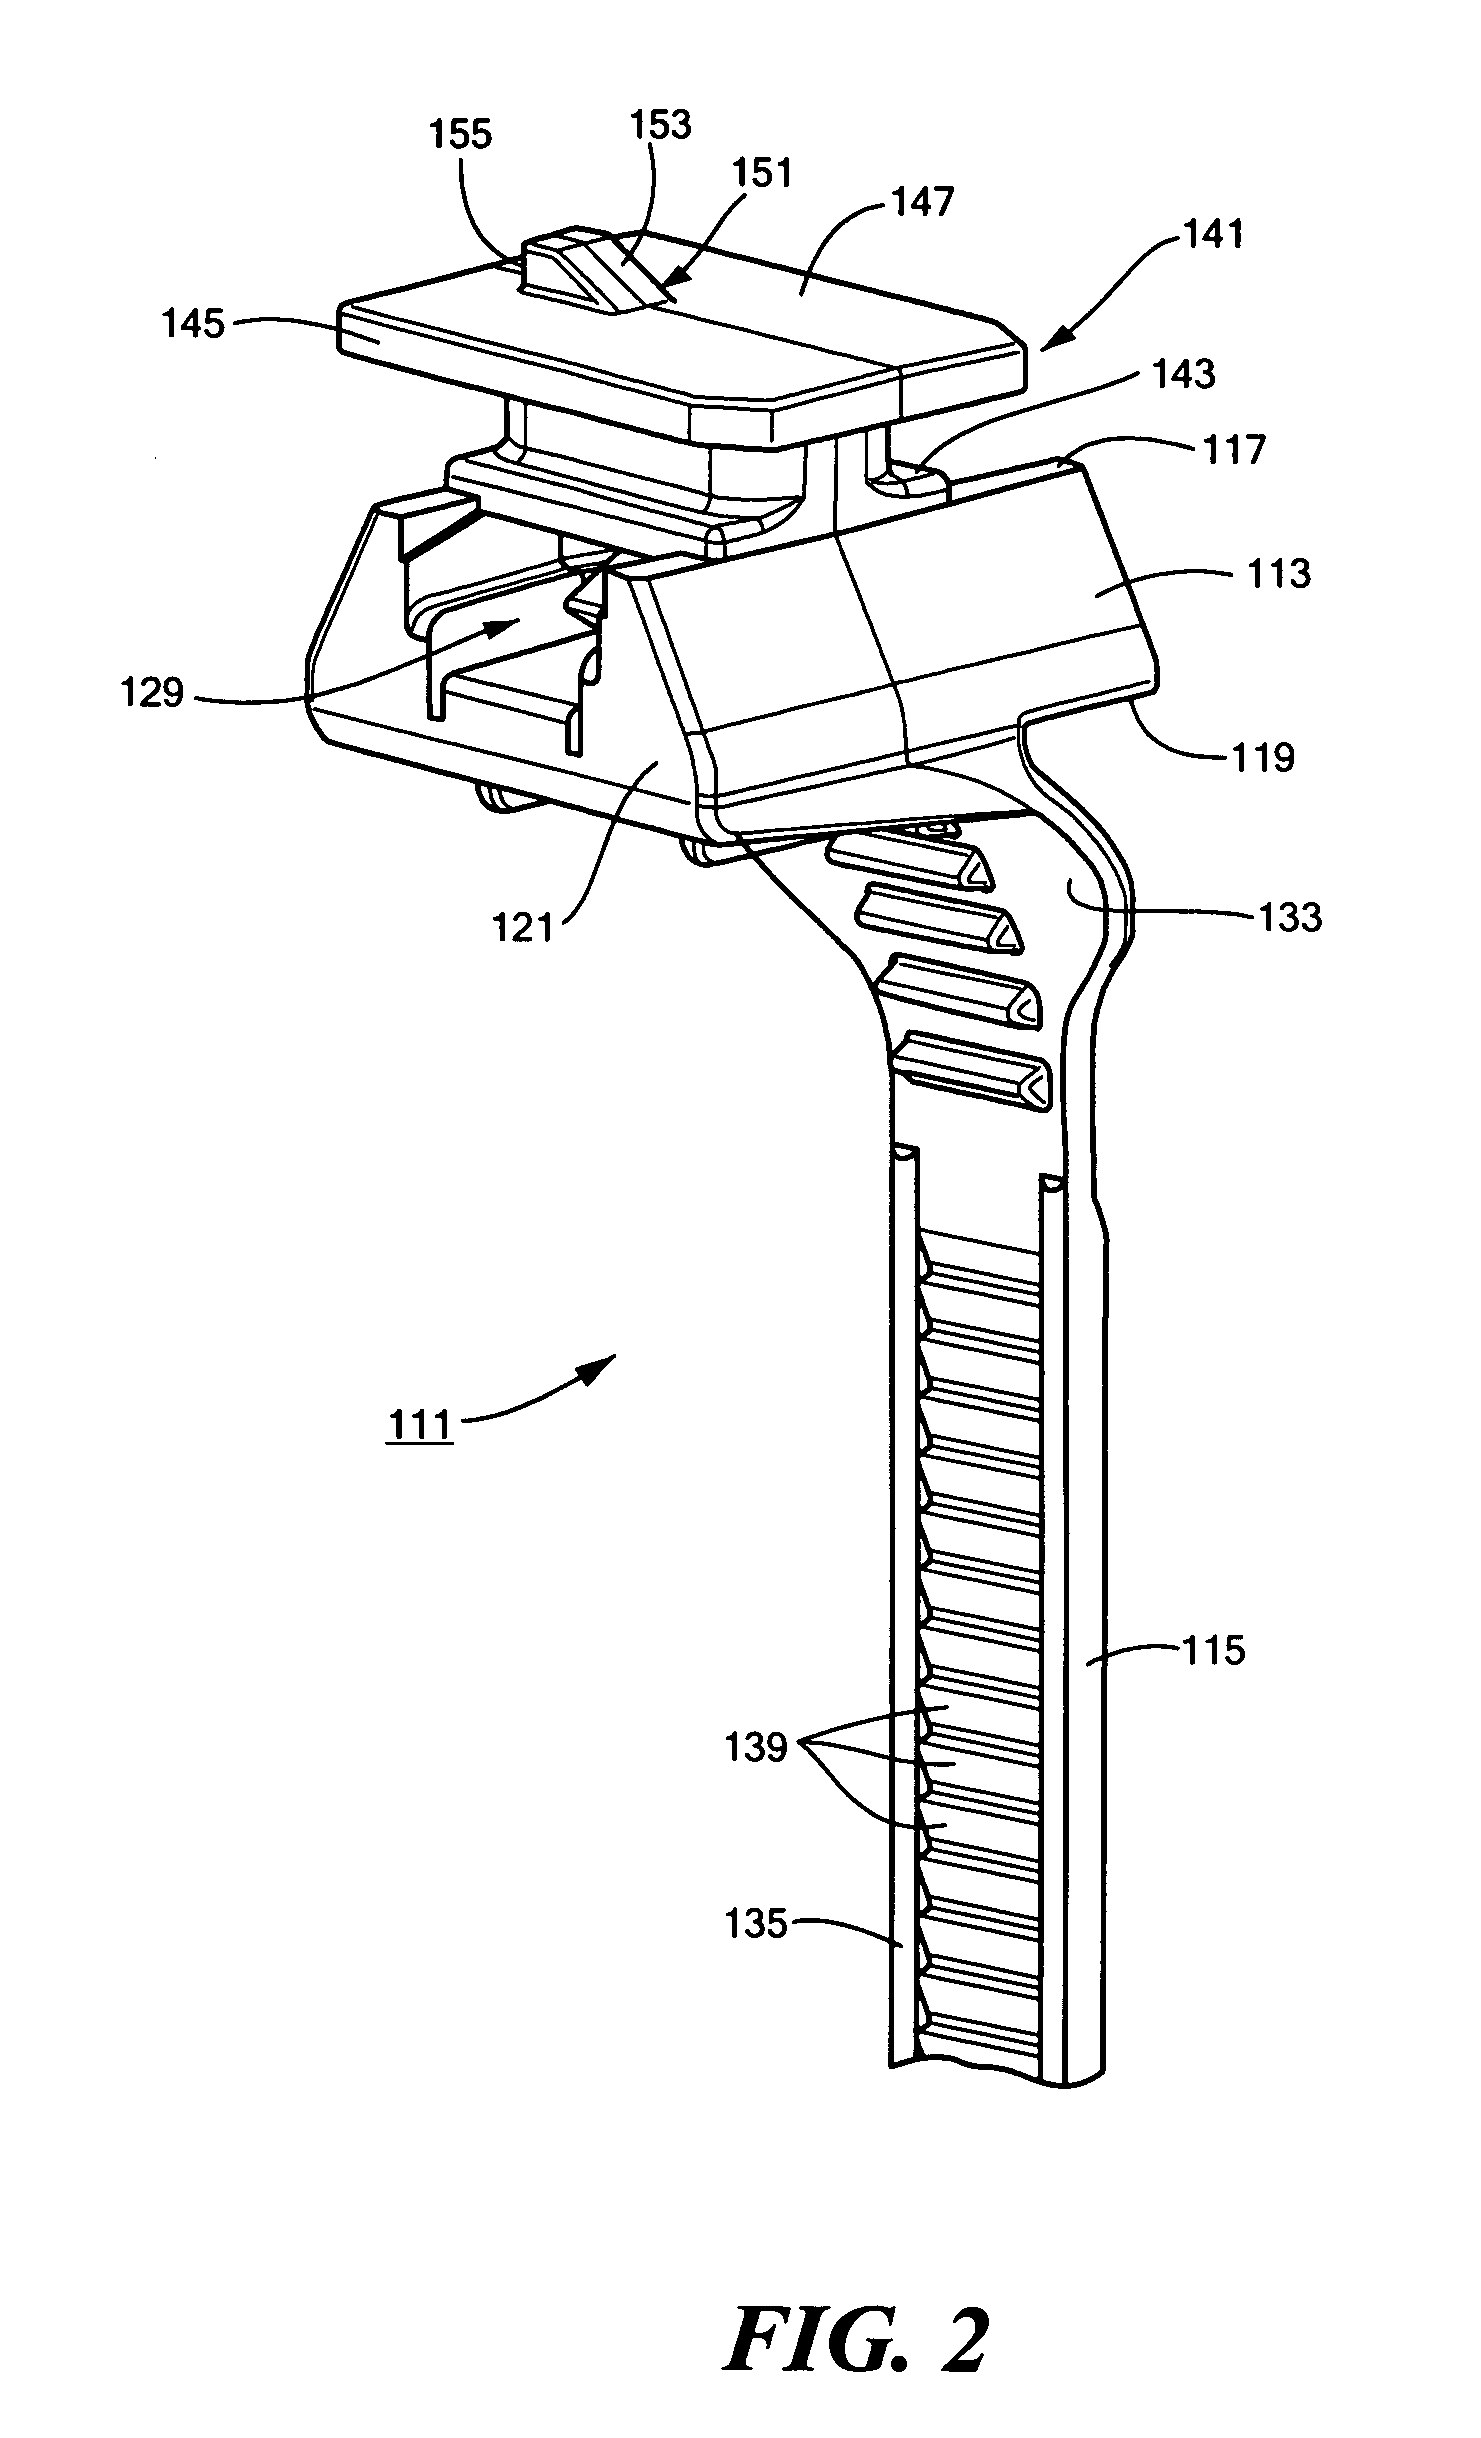 Cable tie with oxygen sensor connector fastener